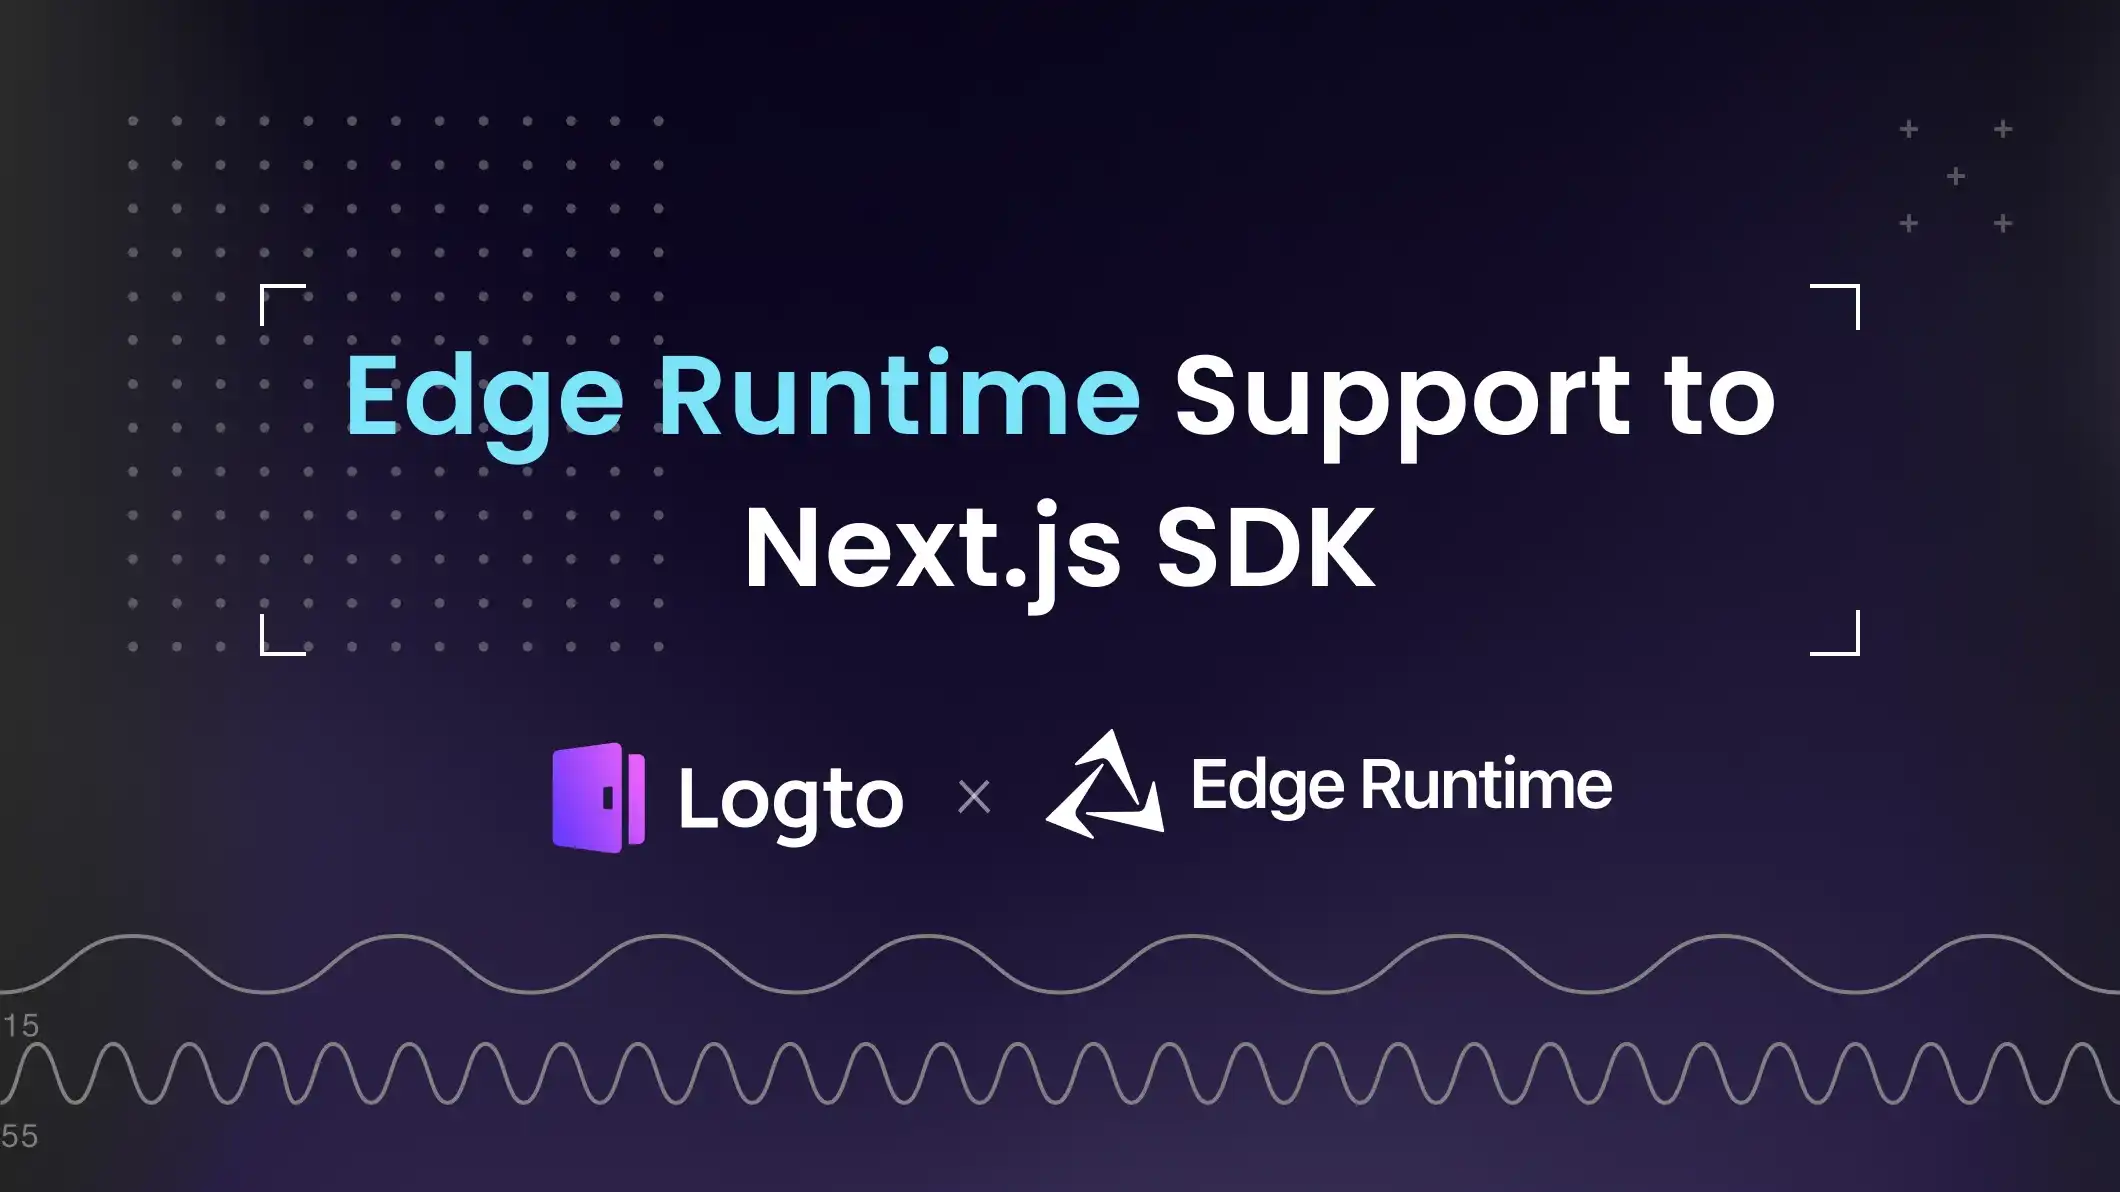 Our experience adding Edge Runtime to Next.js SDK